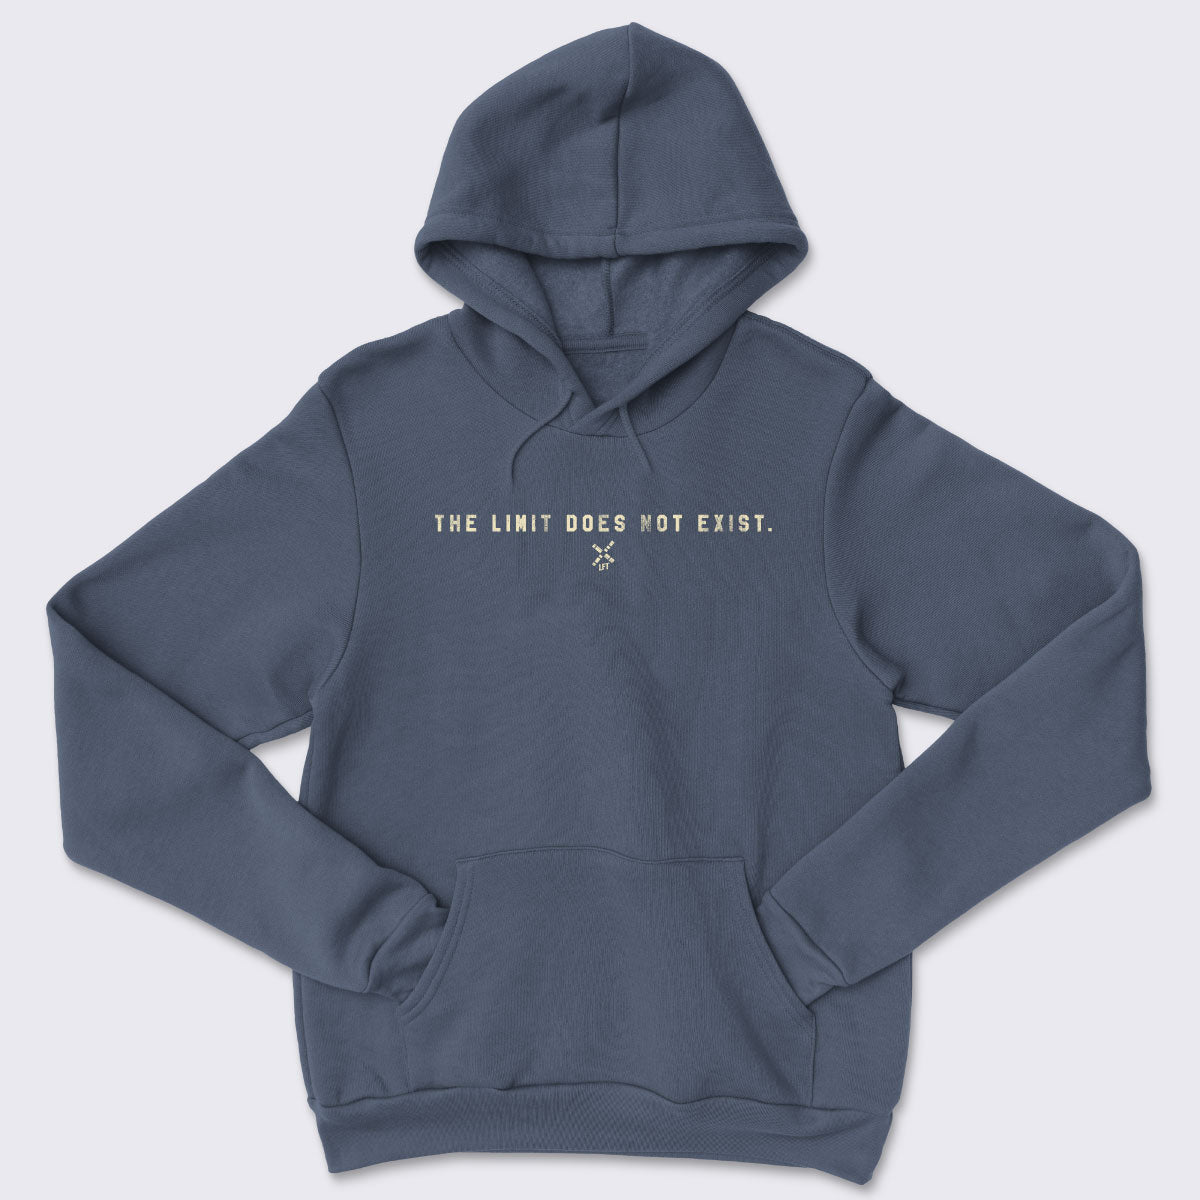 The Limit Does Not Exist Core Fleece Pullover Hooded Sweatshirt